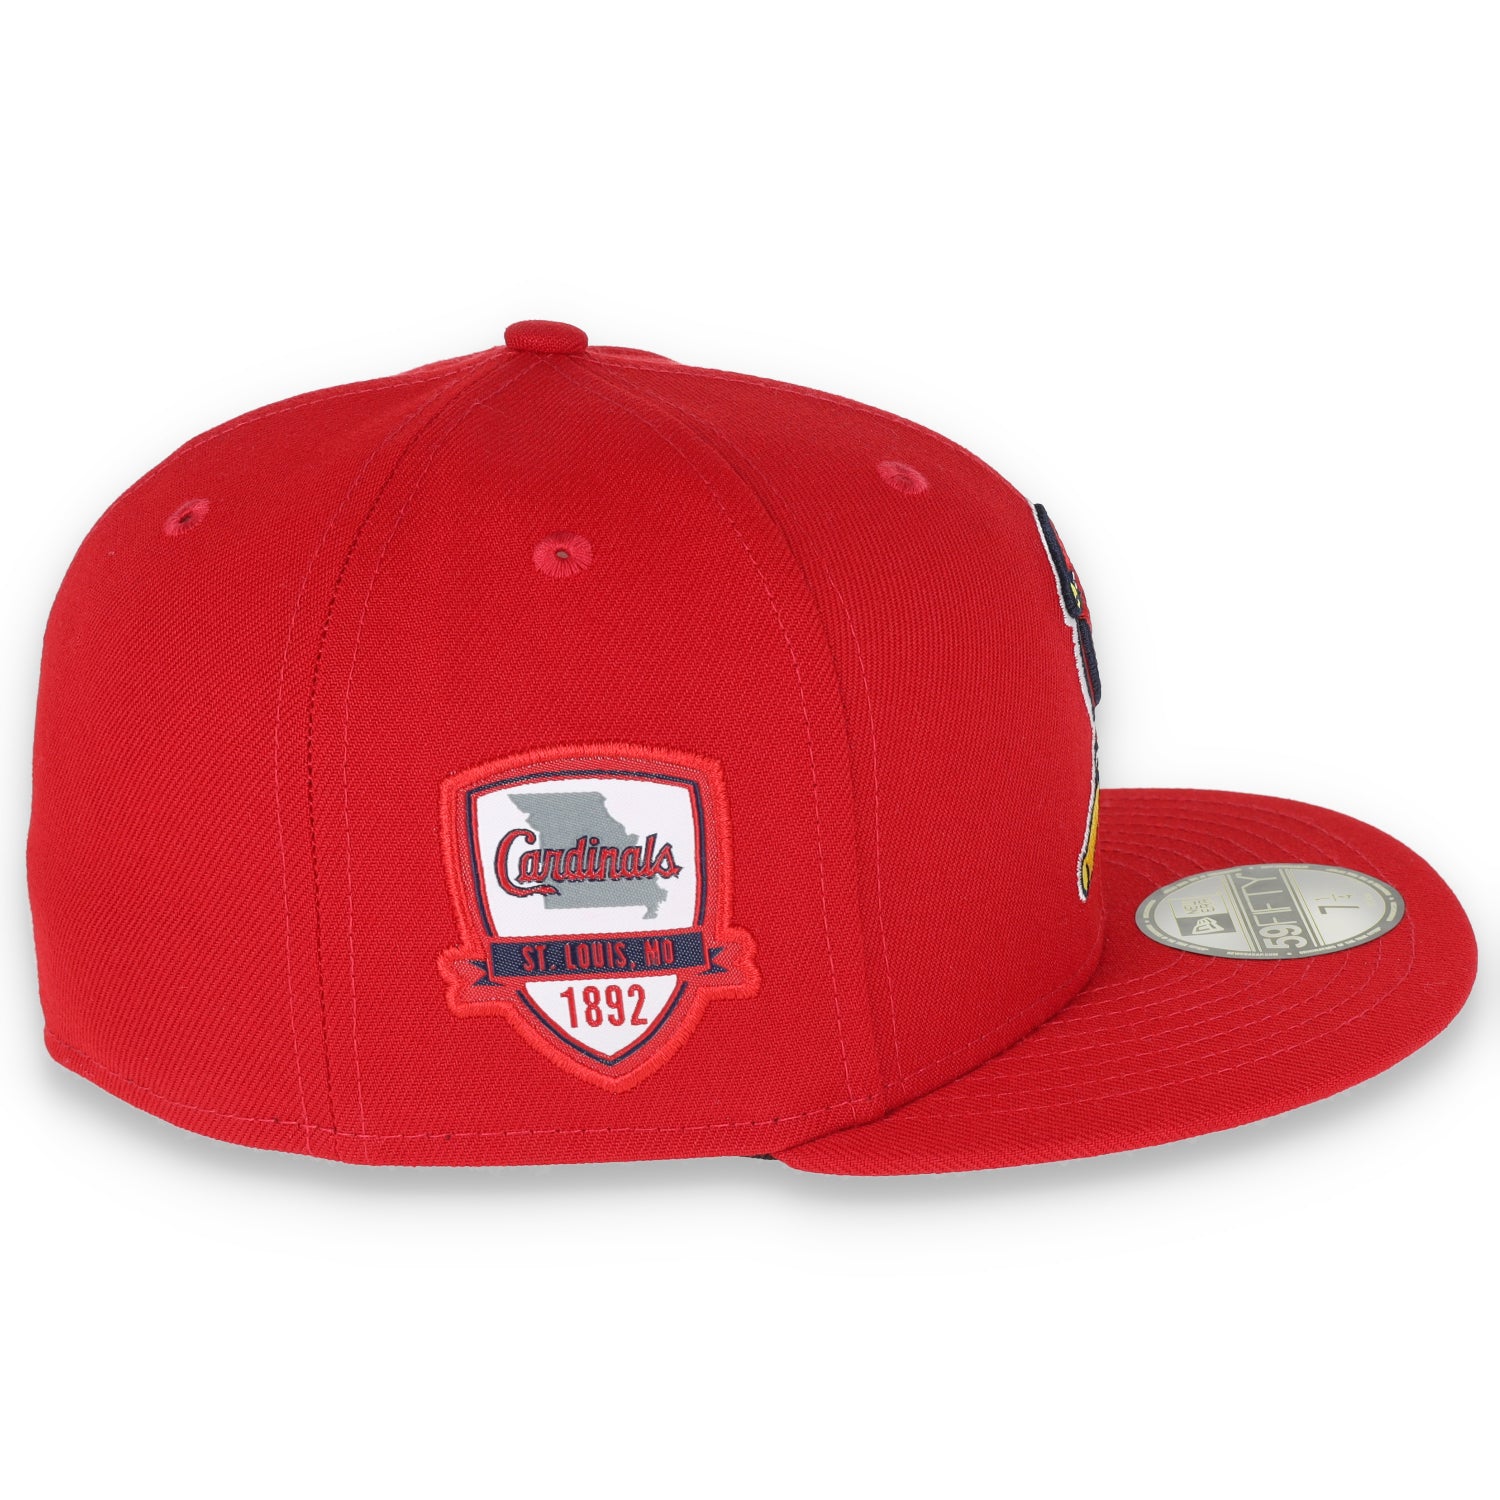 NEW ERA ST LOUIS CARDINALS INAGURAL SIDE PATCH 59FIFTY FITTED HAT